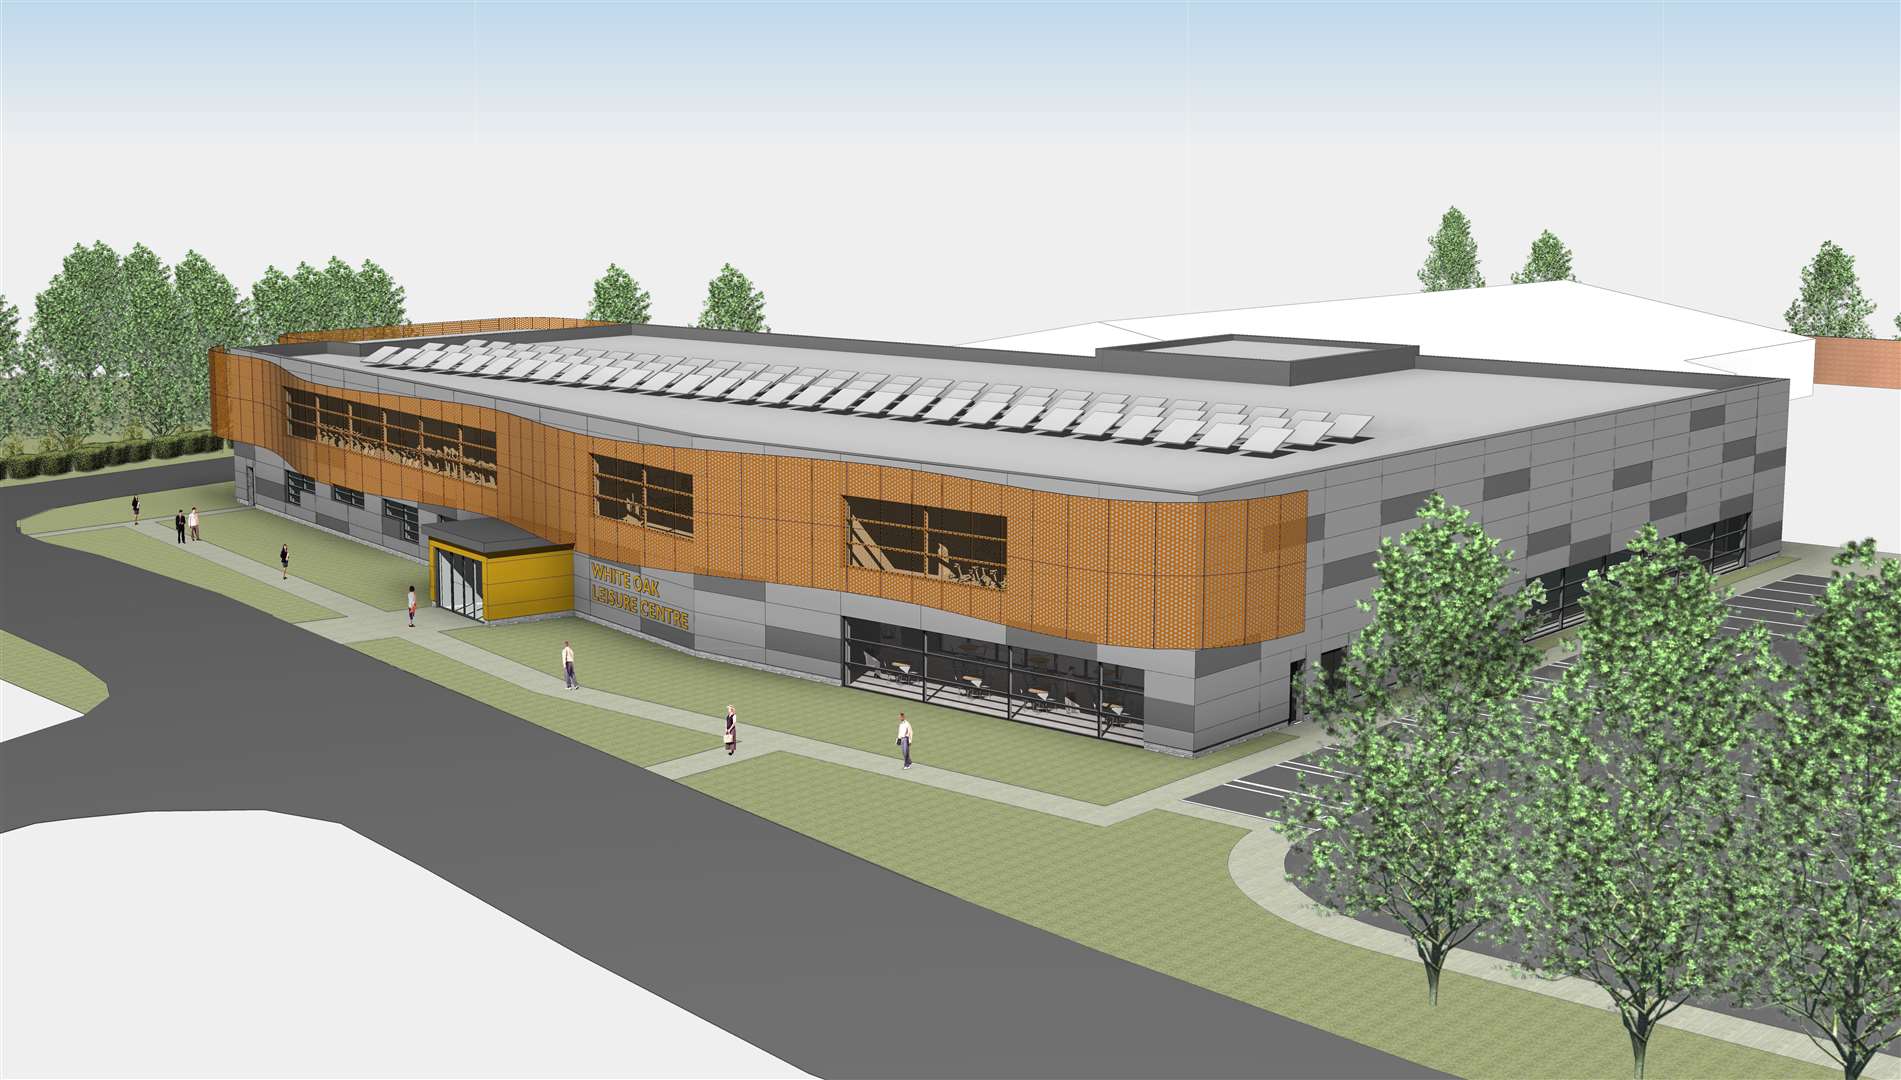 An artist's impression of what the new leisure centre in Hilda May Avenue, Swanley. Picture: Sevenoaks council